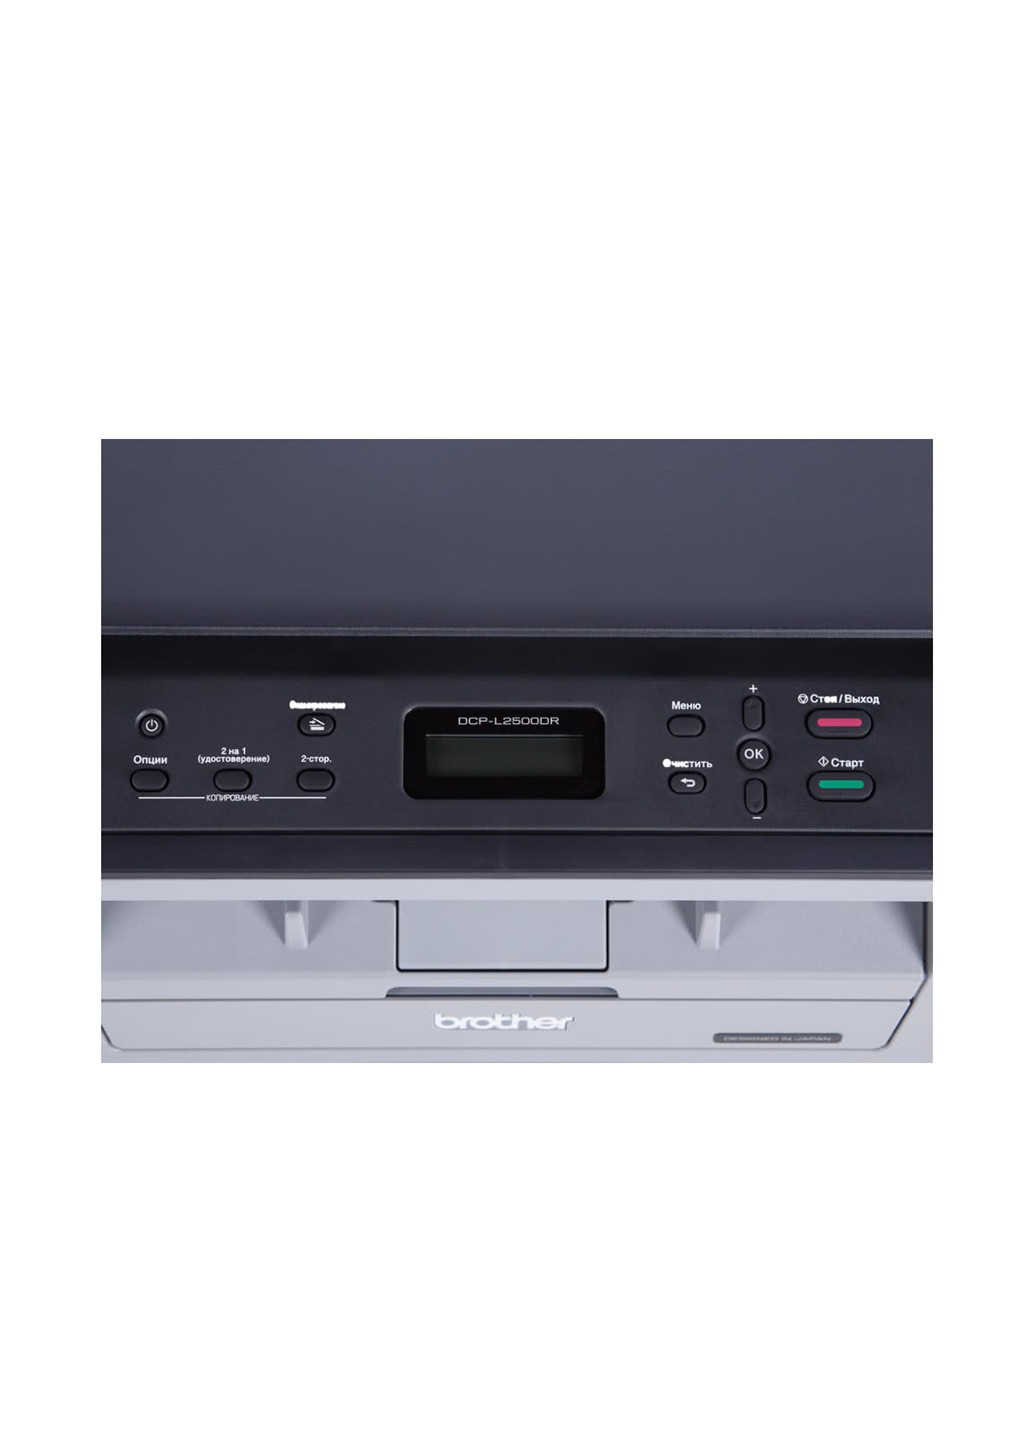 МФУ лазерное DCP-L2500DR Brother мфу лазерное brother dcp-l2500dr (132867175)